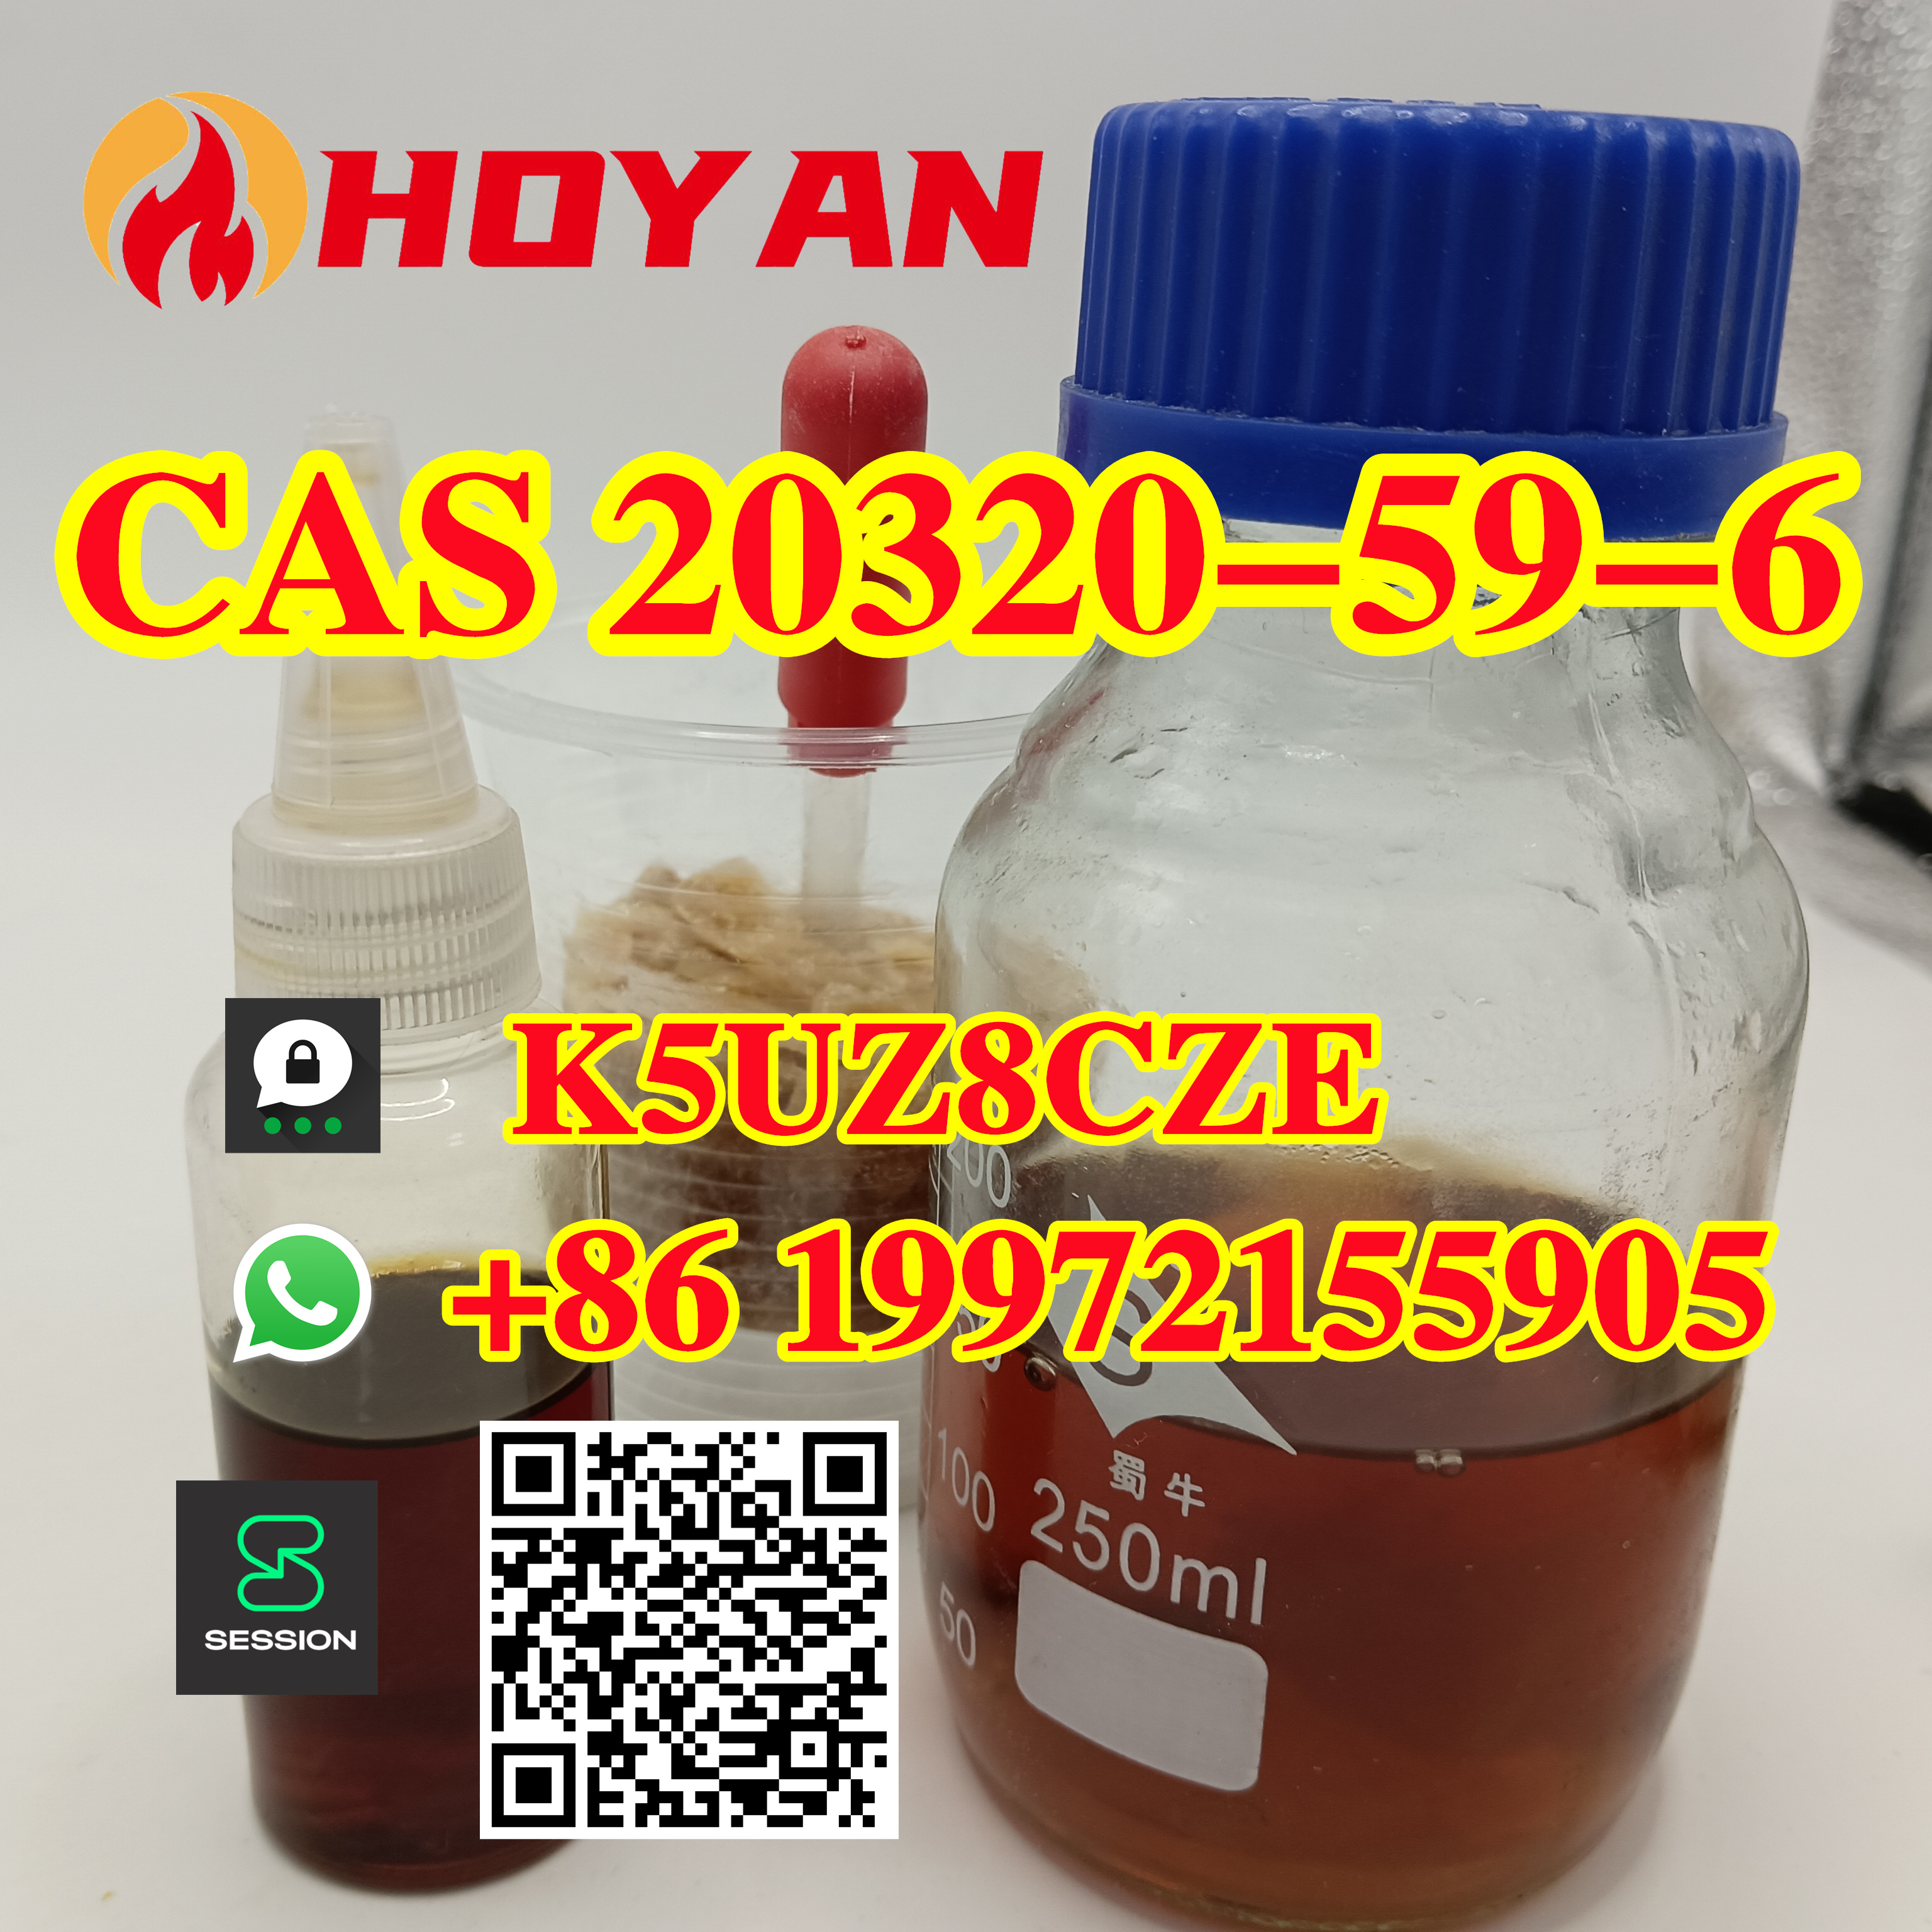 CAS 20320-59-6 BMK oil Factory Direct Sell High quality,germany,Business,Free Classifieds,Post Free Ads,77traders.com